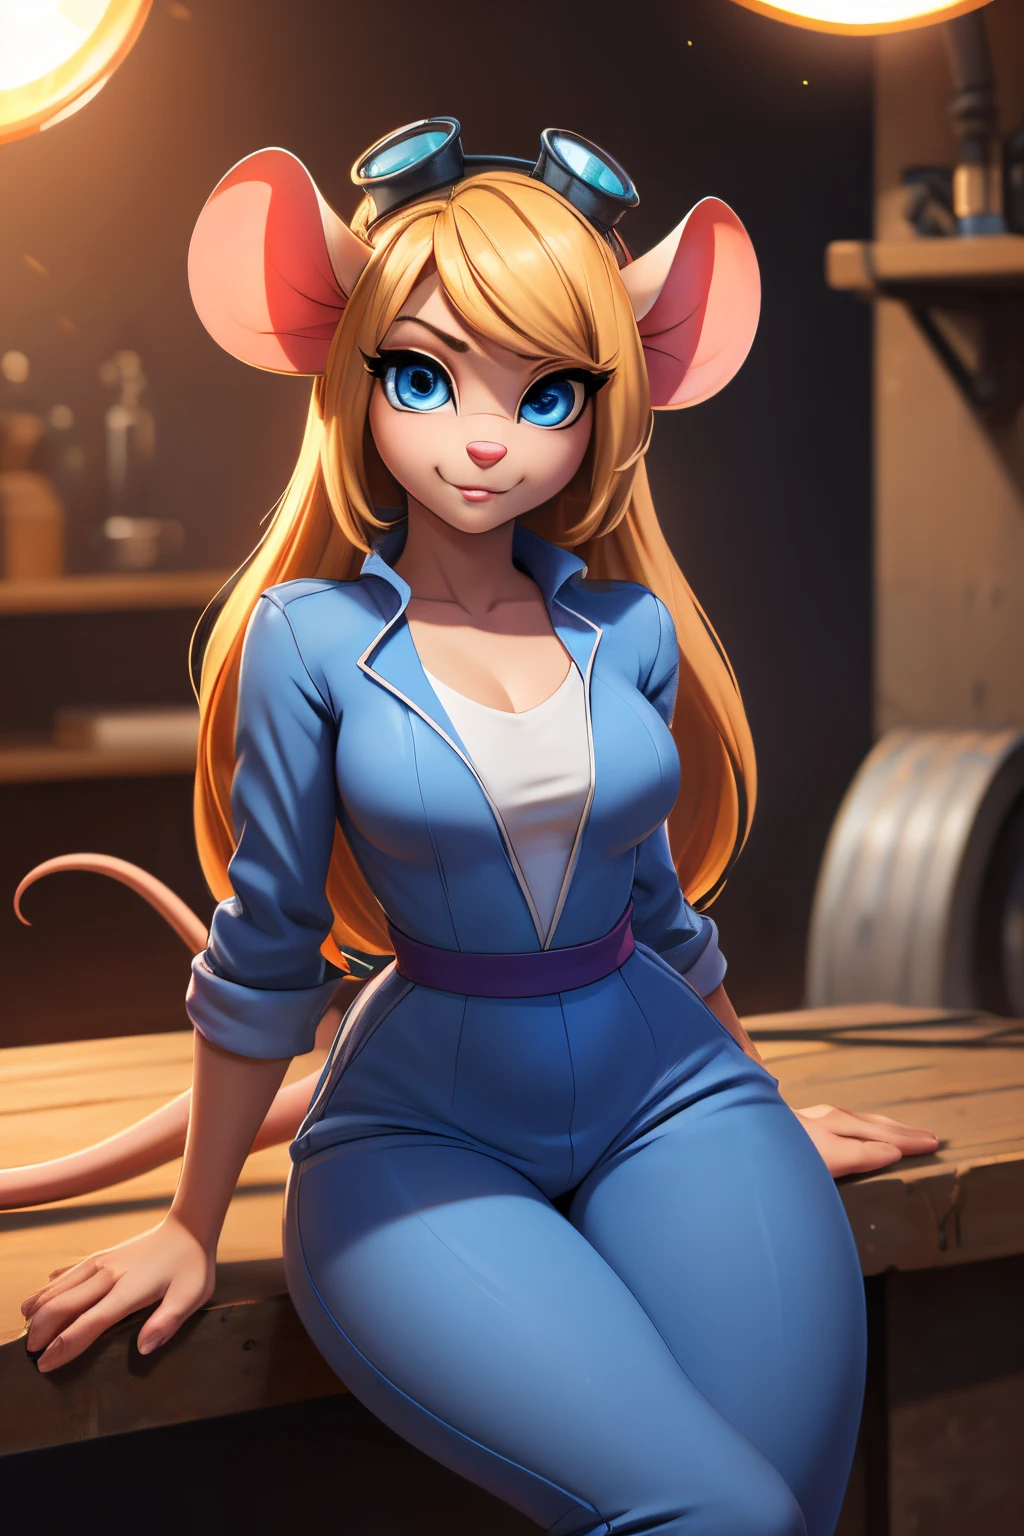 ((ultra quality)), ((tmasterpiece)), Nut, anthropomorphic mouse girl, Furry, ((blonde woman, hairlong)), Beautiful cute face, beautiful female lips, charming beauty, ((Kind expression on his face)), seductively looking at the camera, slightly closed eyes, ((Skin color: white)), Body glare, ((there is a mouse tail in the back)), ((detailed beautiful female eyes)), ((big blue eyes)), beautiful female hands, ((perfect female figure)), ideal female body shapes, Beautiful waist, nice feet, big thighs, Beautiful butt, ((Subtle and beautiful)), sits seductively on the table, ((dark blue jumpsuit, with sexy neckline, welding goggles on head)) background: workshop, ((Depth of field)), ((high quality clear image)), ((crisp details)), ((higly detailed)), Realistic, Professional Photo Session, ((Clear Focus)), ((cartoon)), the anime, NSFW